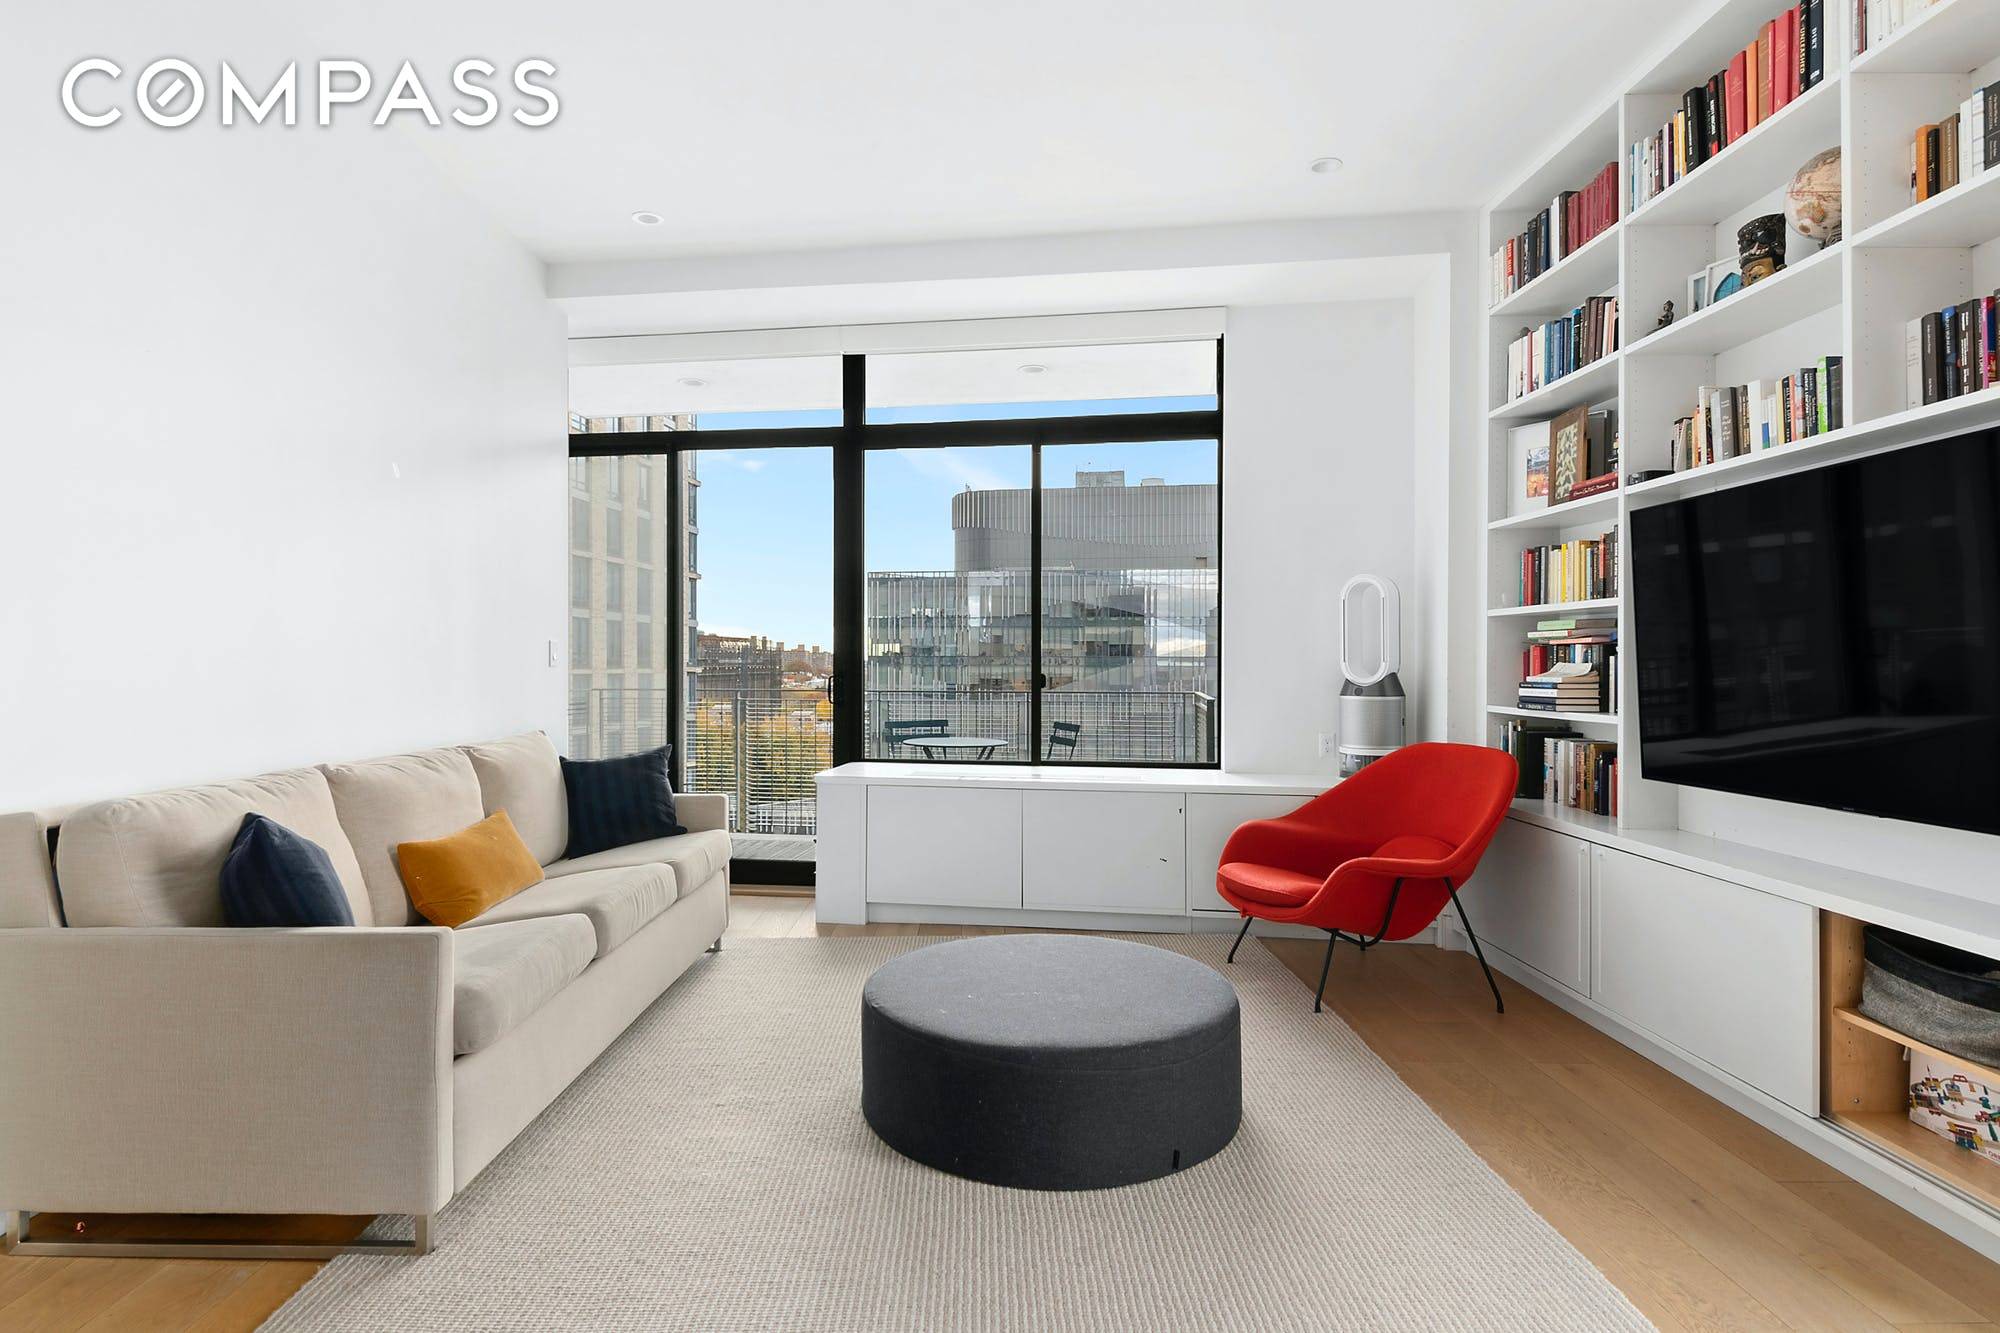 Location, light, thoughtful design this meticulously renovated two bedroom condo checks it all !